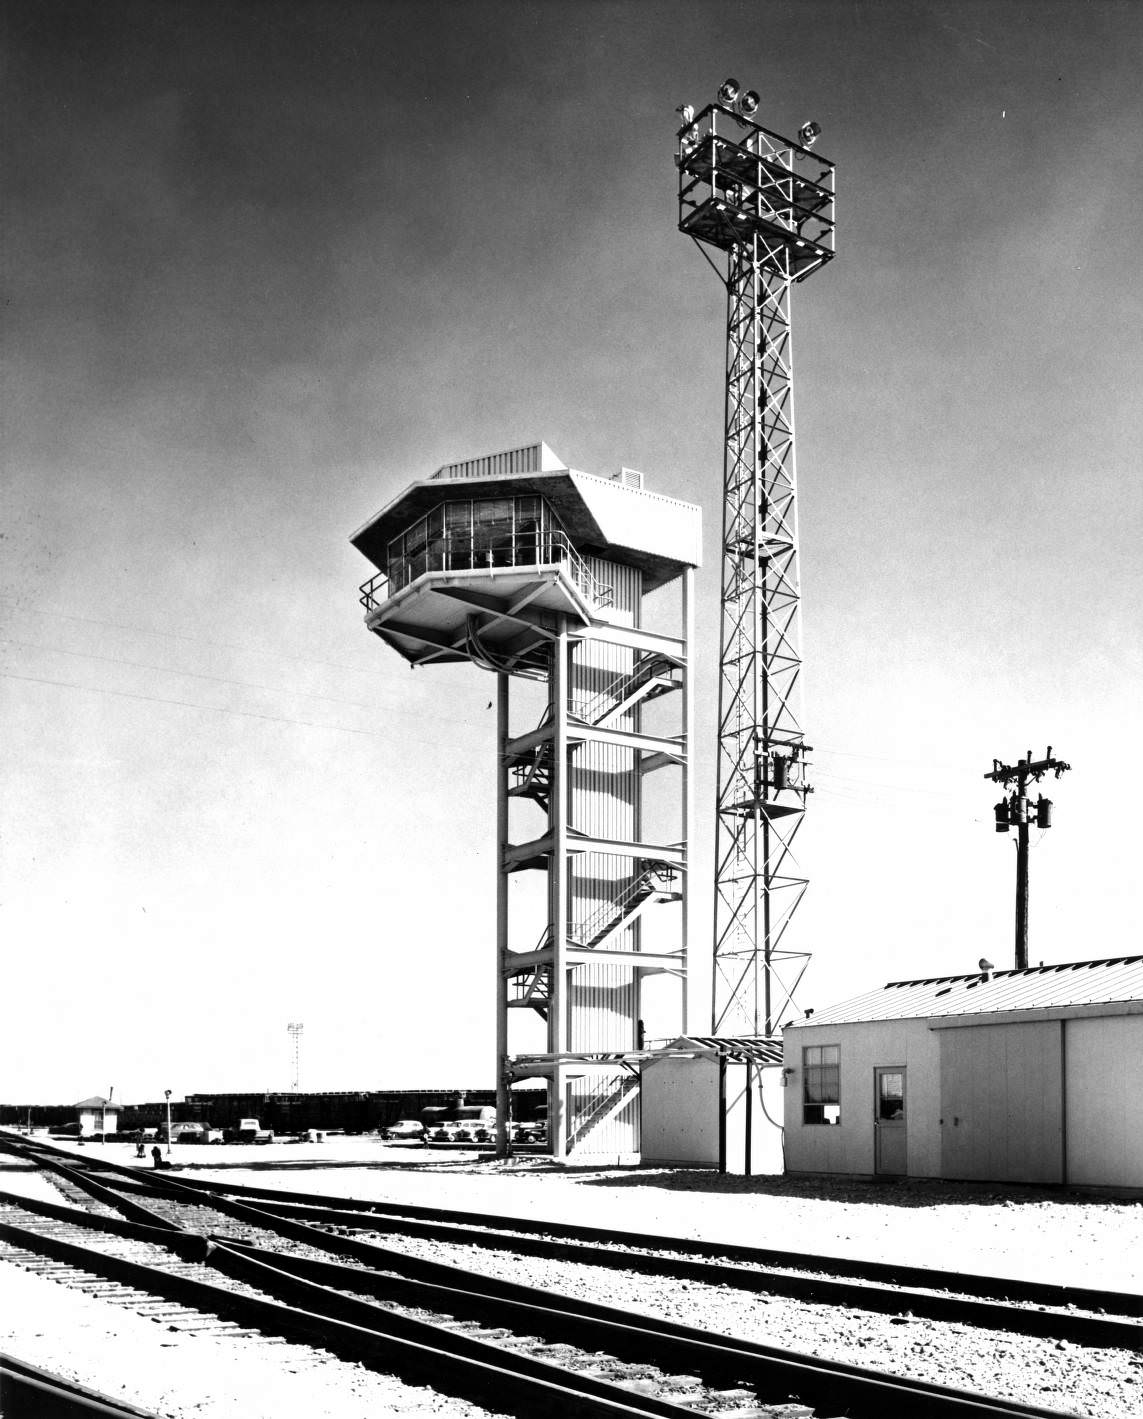 Railroad tower, 1930s